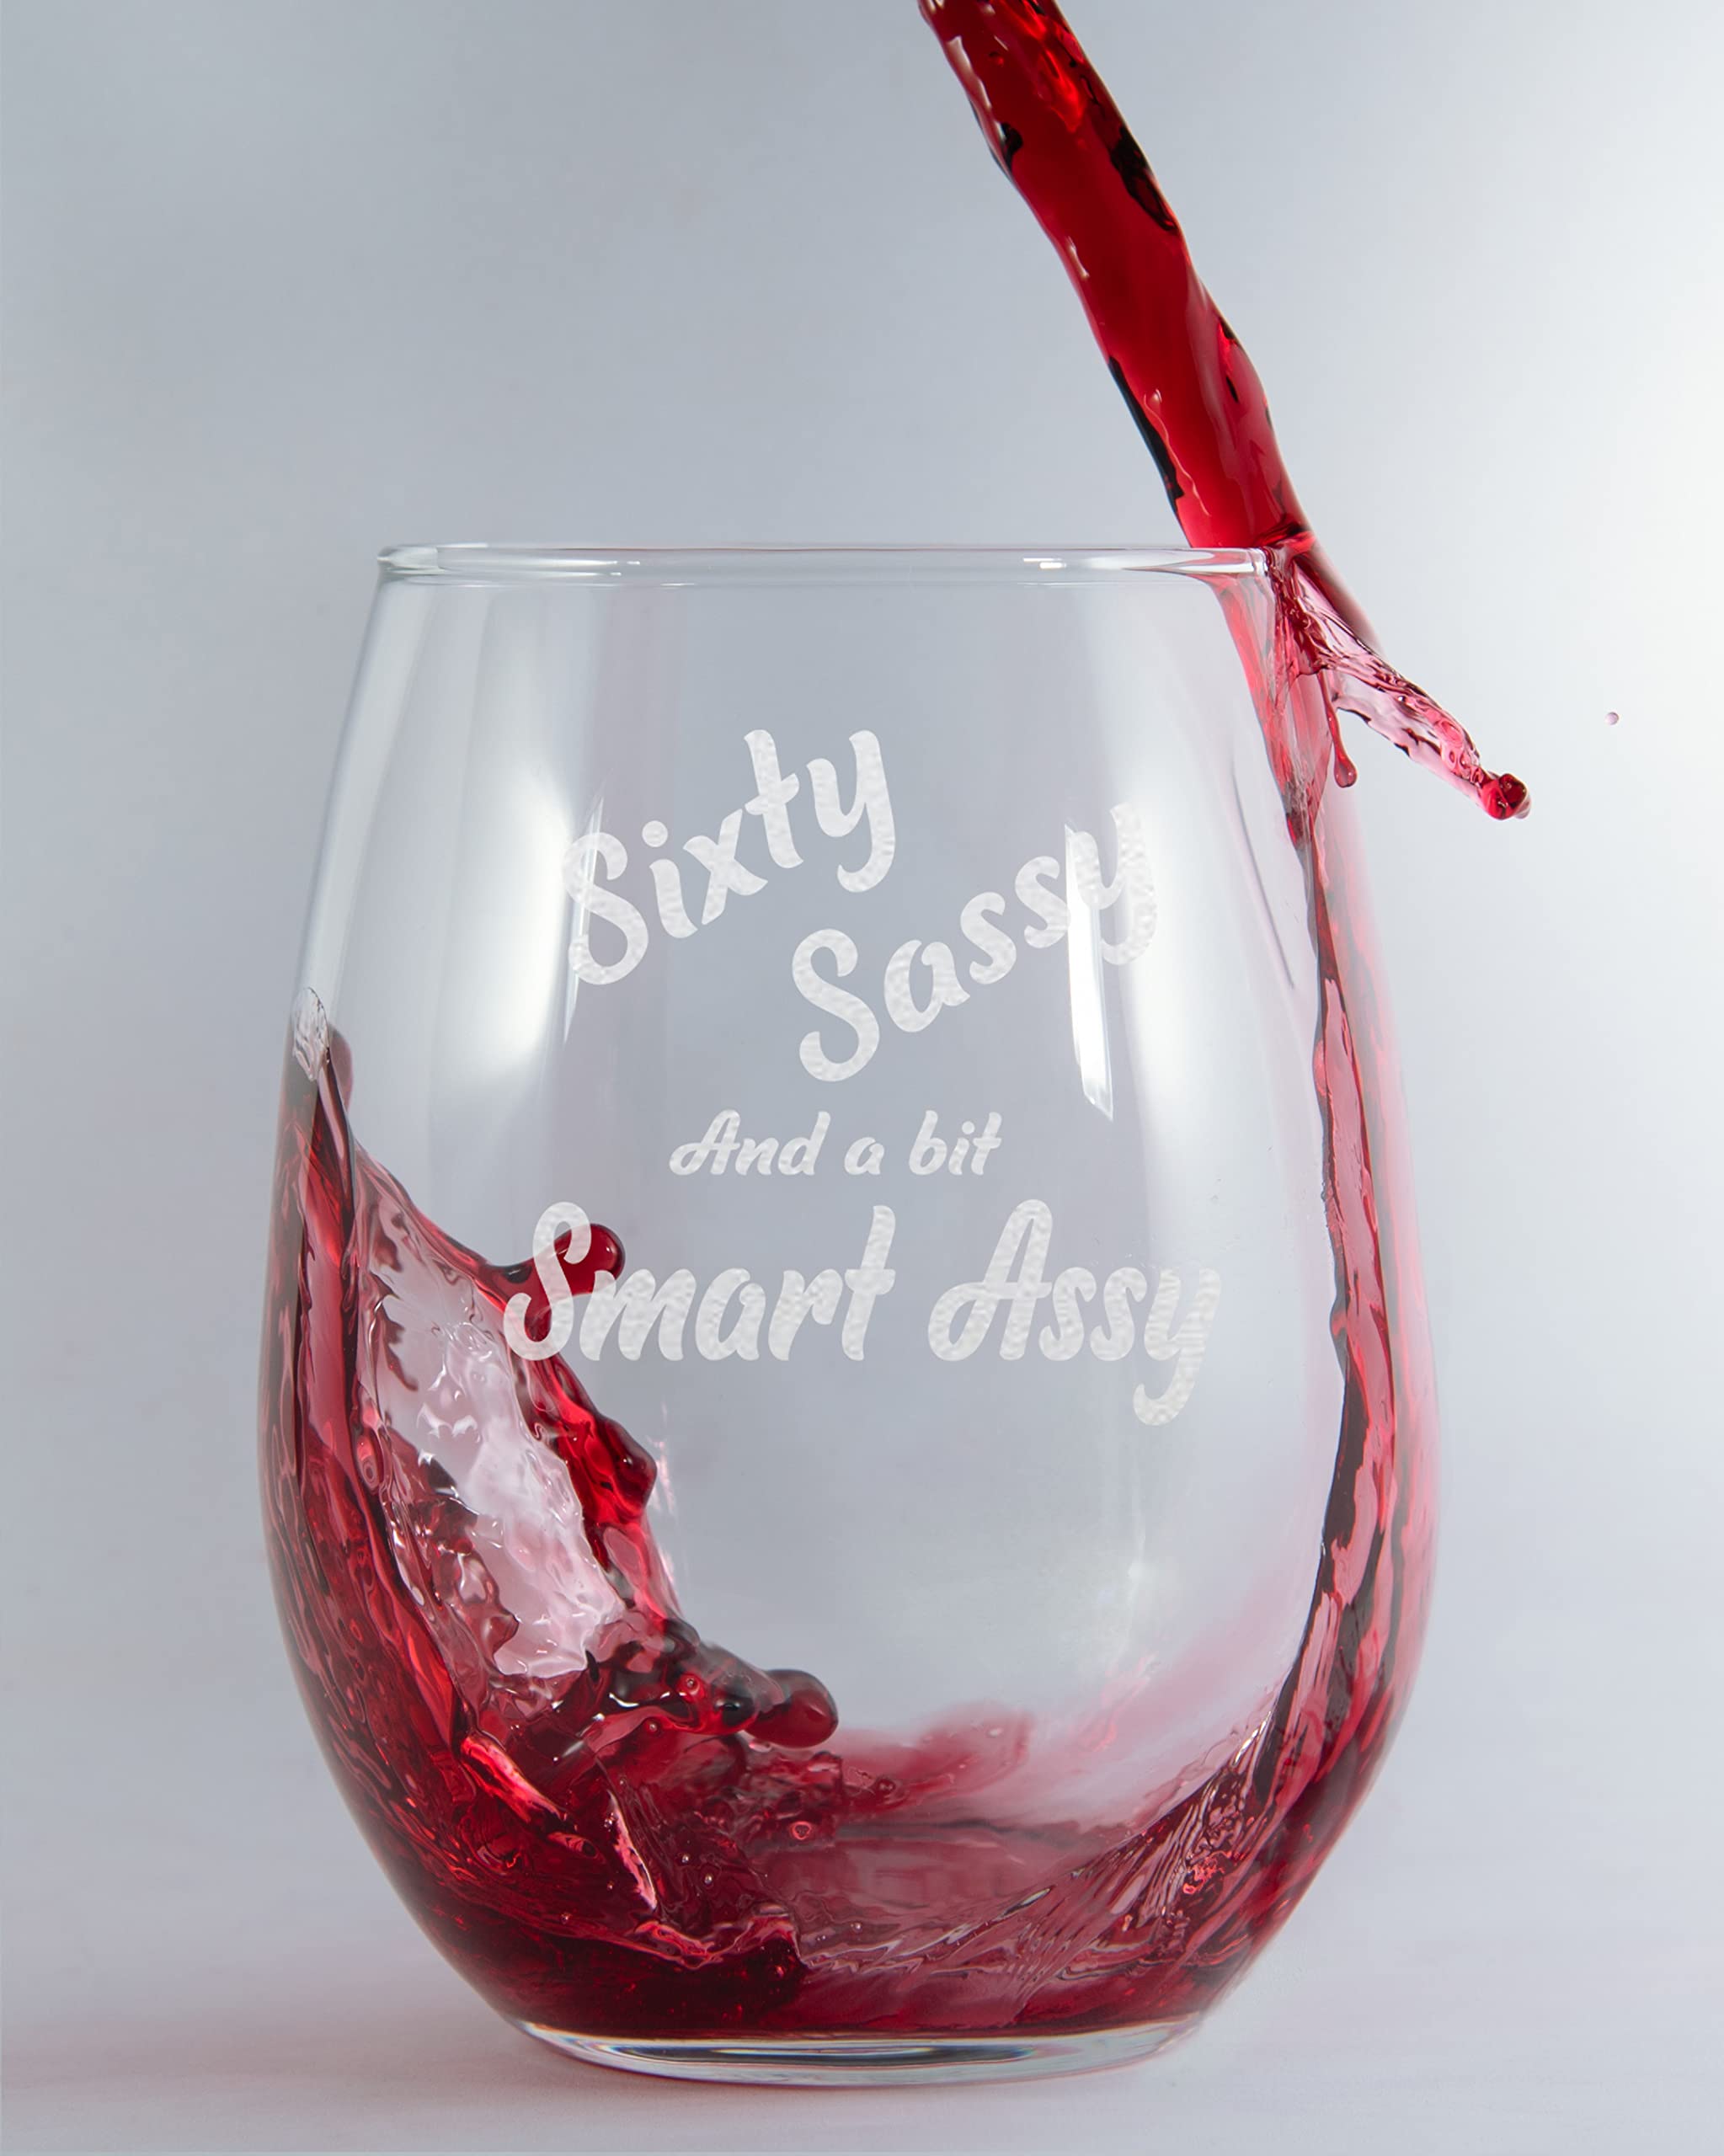 CARVELITA Sixty Sassy And A Bit Smart Assy 15oz Engraved Stemless Wine Glass, Sarcastic Gifts For Best Friends - Perfect Party Decoration Idea, 60 Birthday Gifts for Women